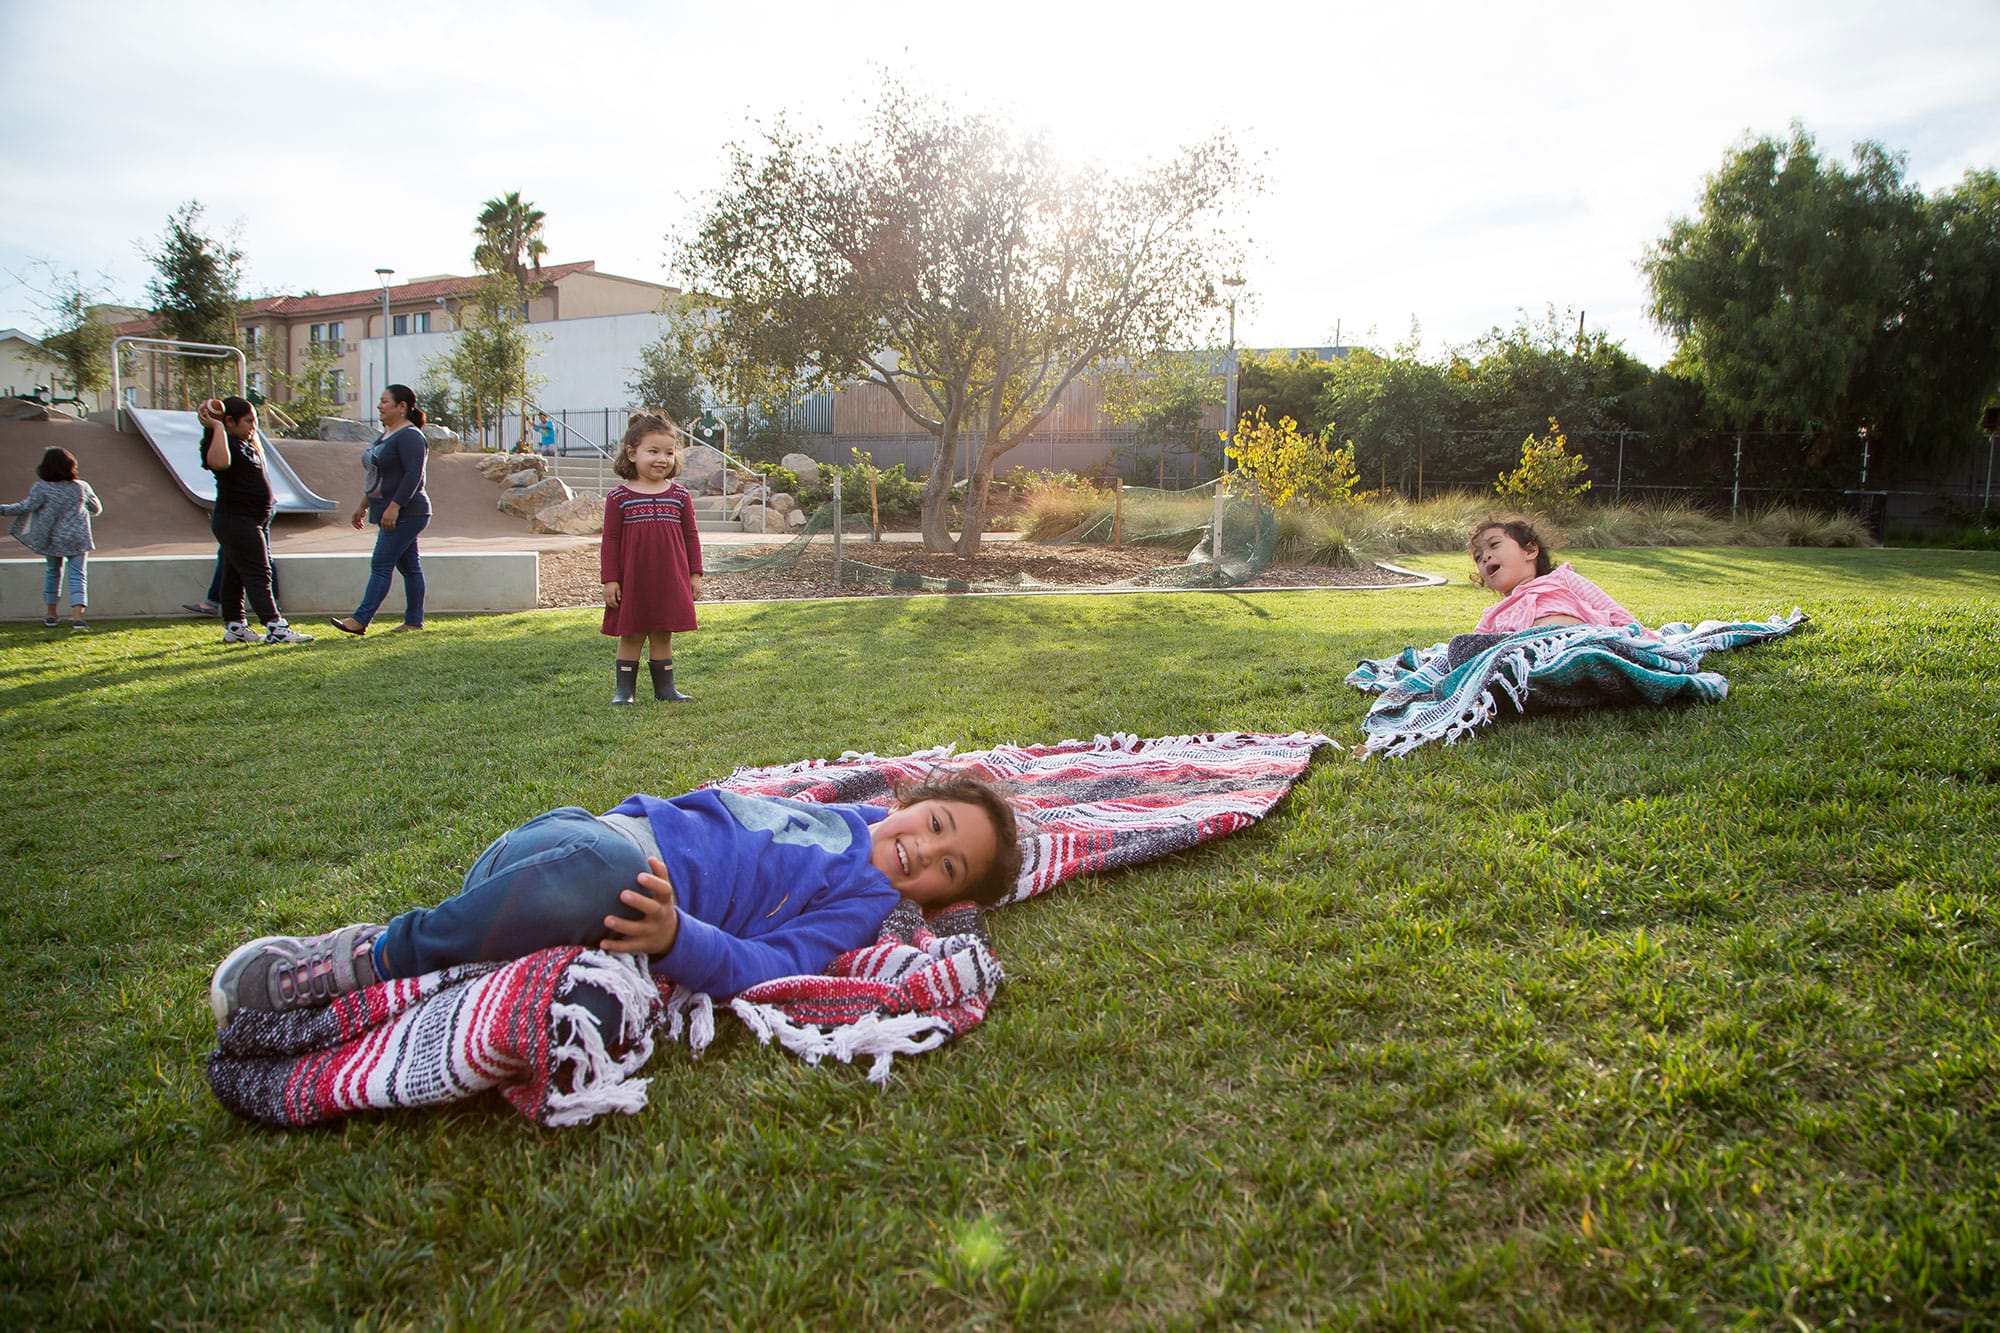 A group of children laying on blankets in the grass.